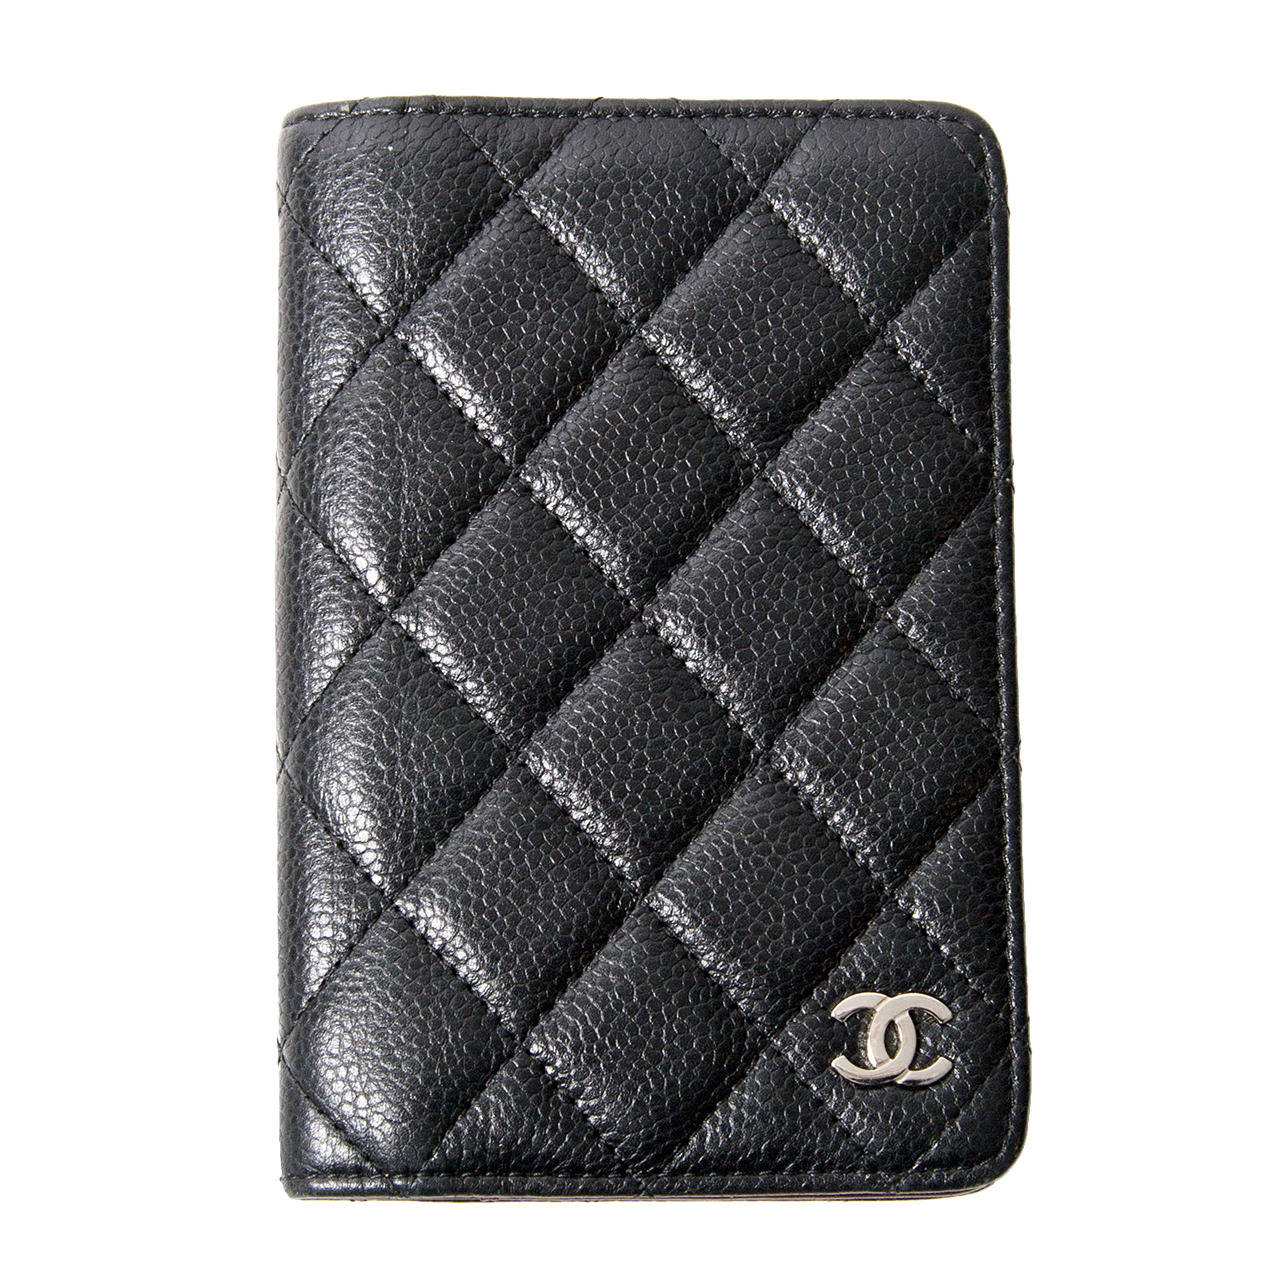 CHANEL, Office, Auth Chanel Classic Quilted Medium Beige Caviar Agenda W  Gold Hardware Rare